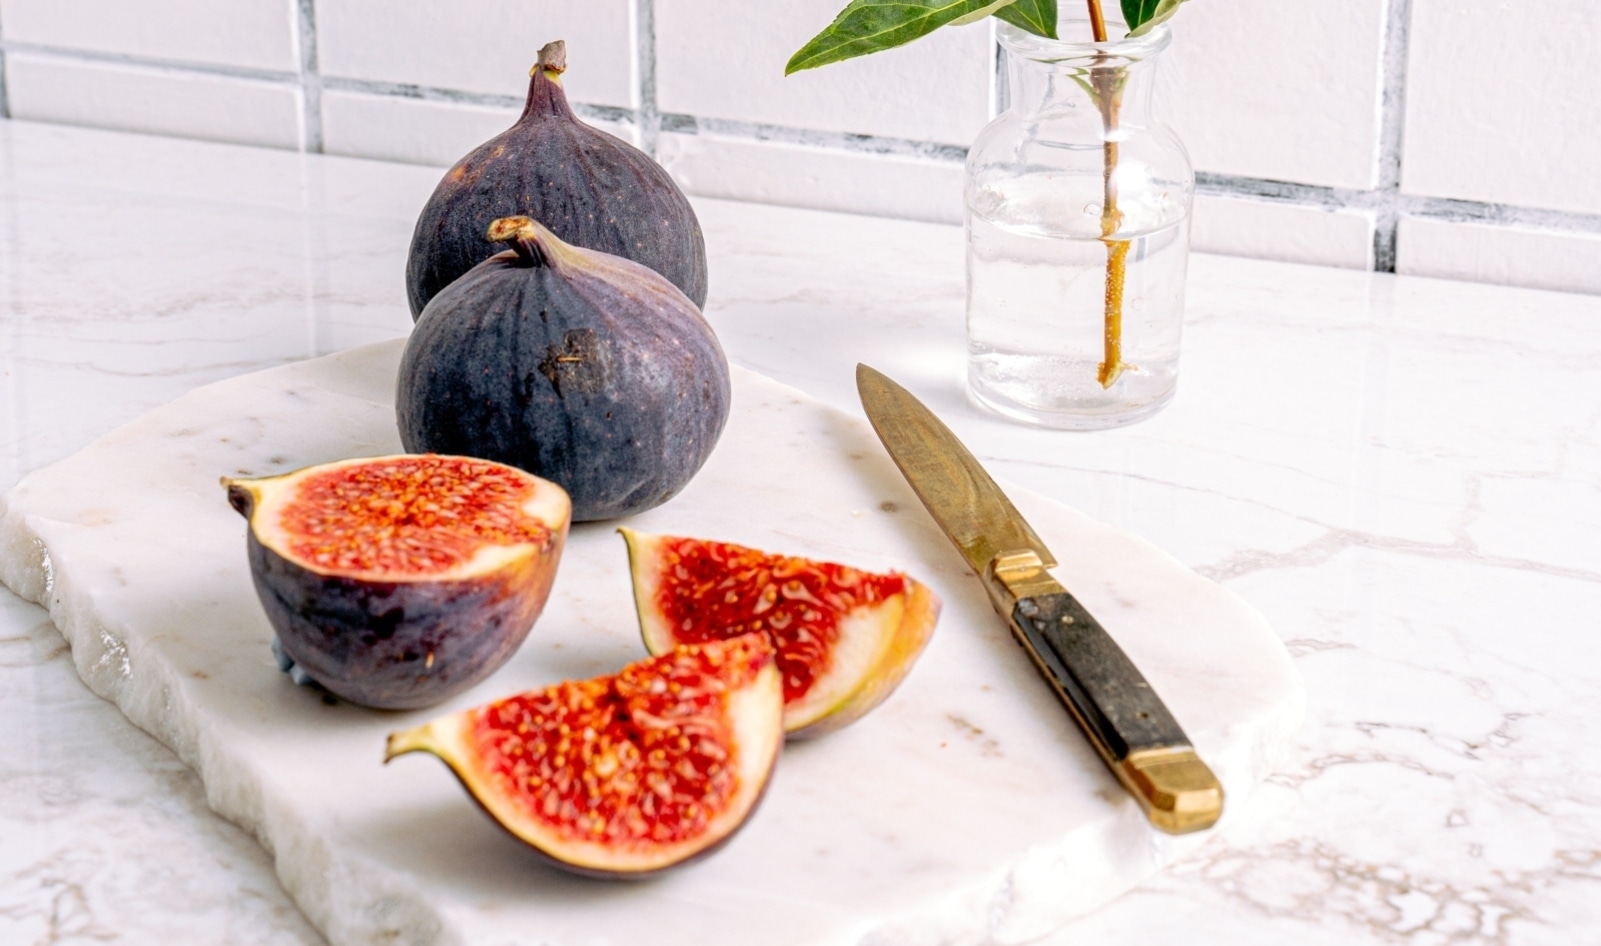 Are Figs Vegan? The Answer Is Not as Clear-Cut as You Might Think